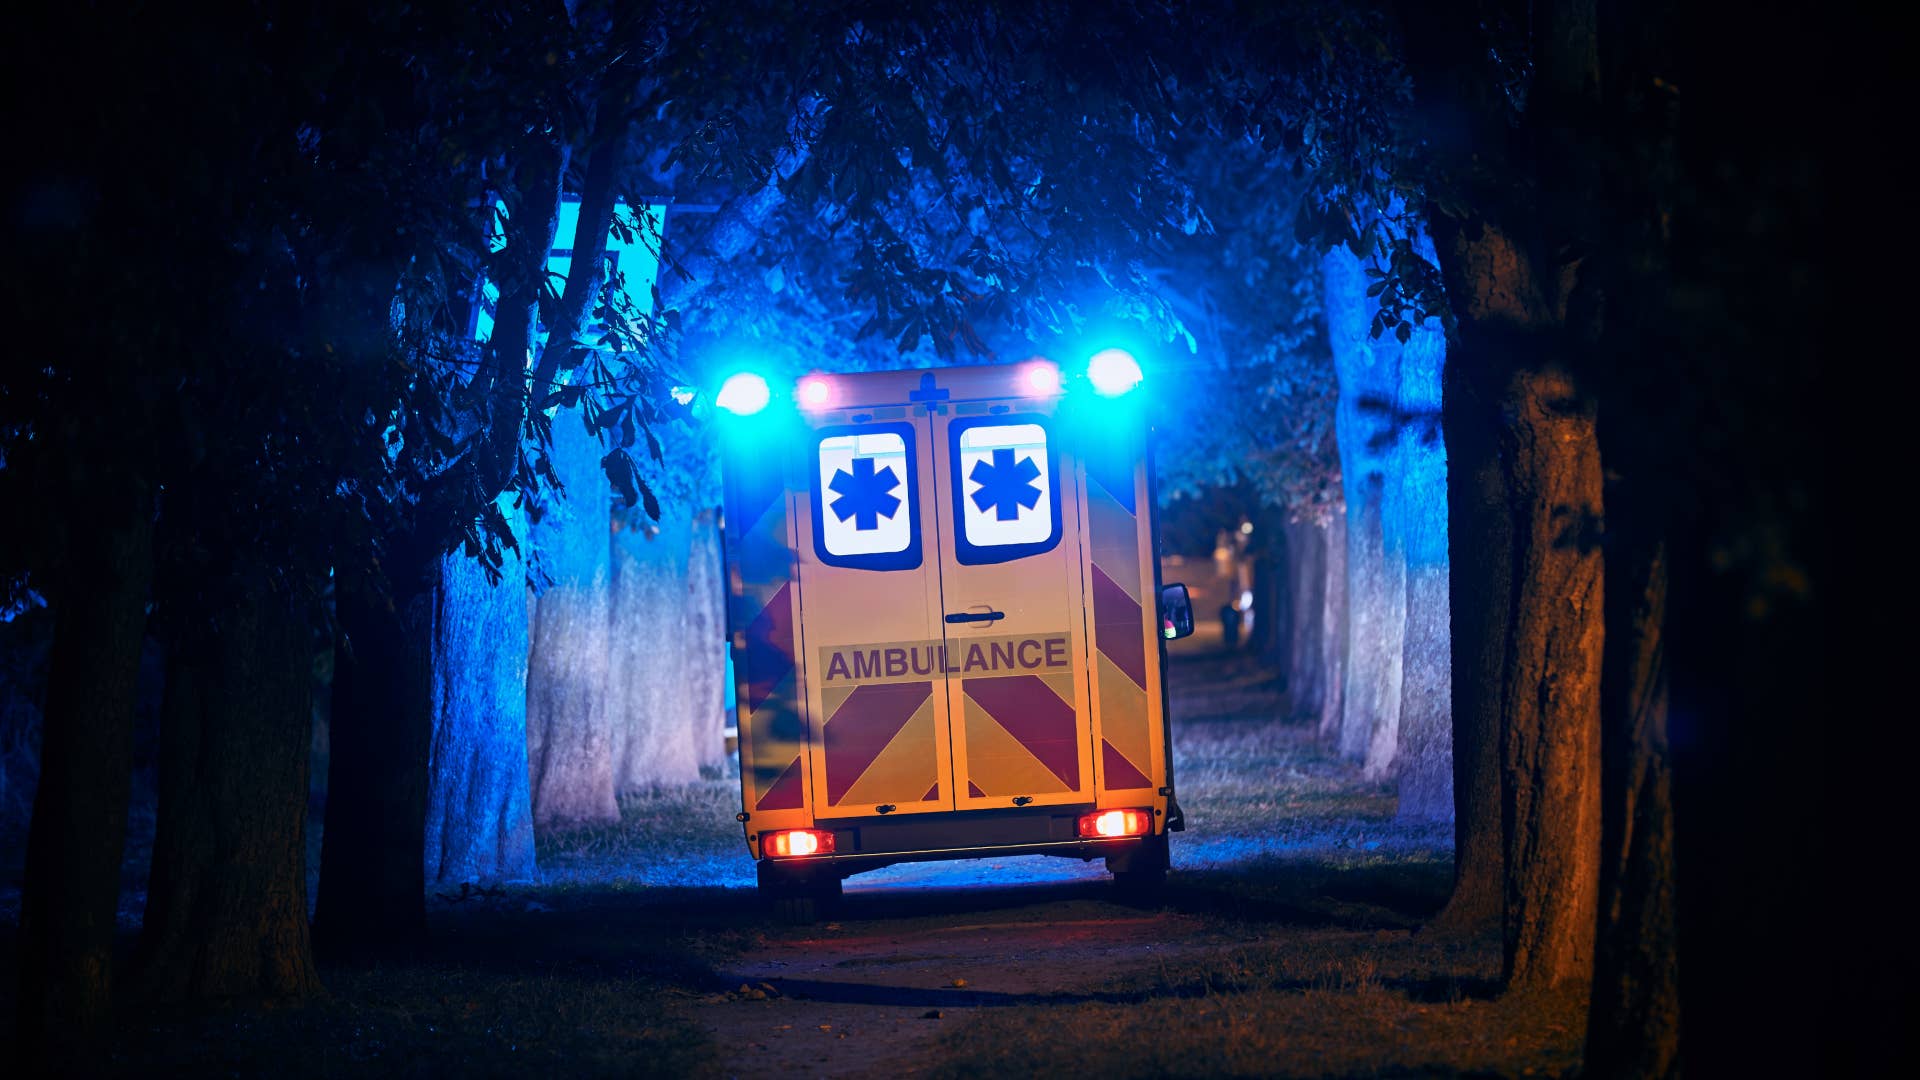 Ambulance is pictured at night